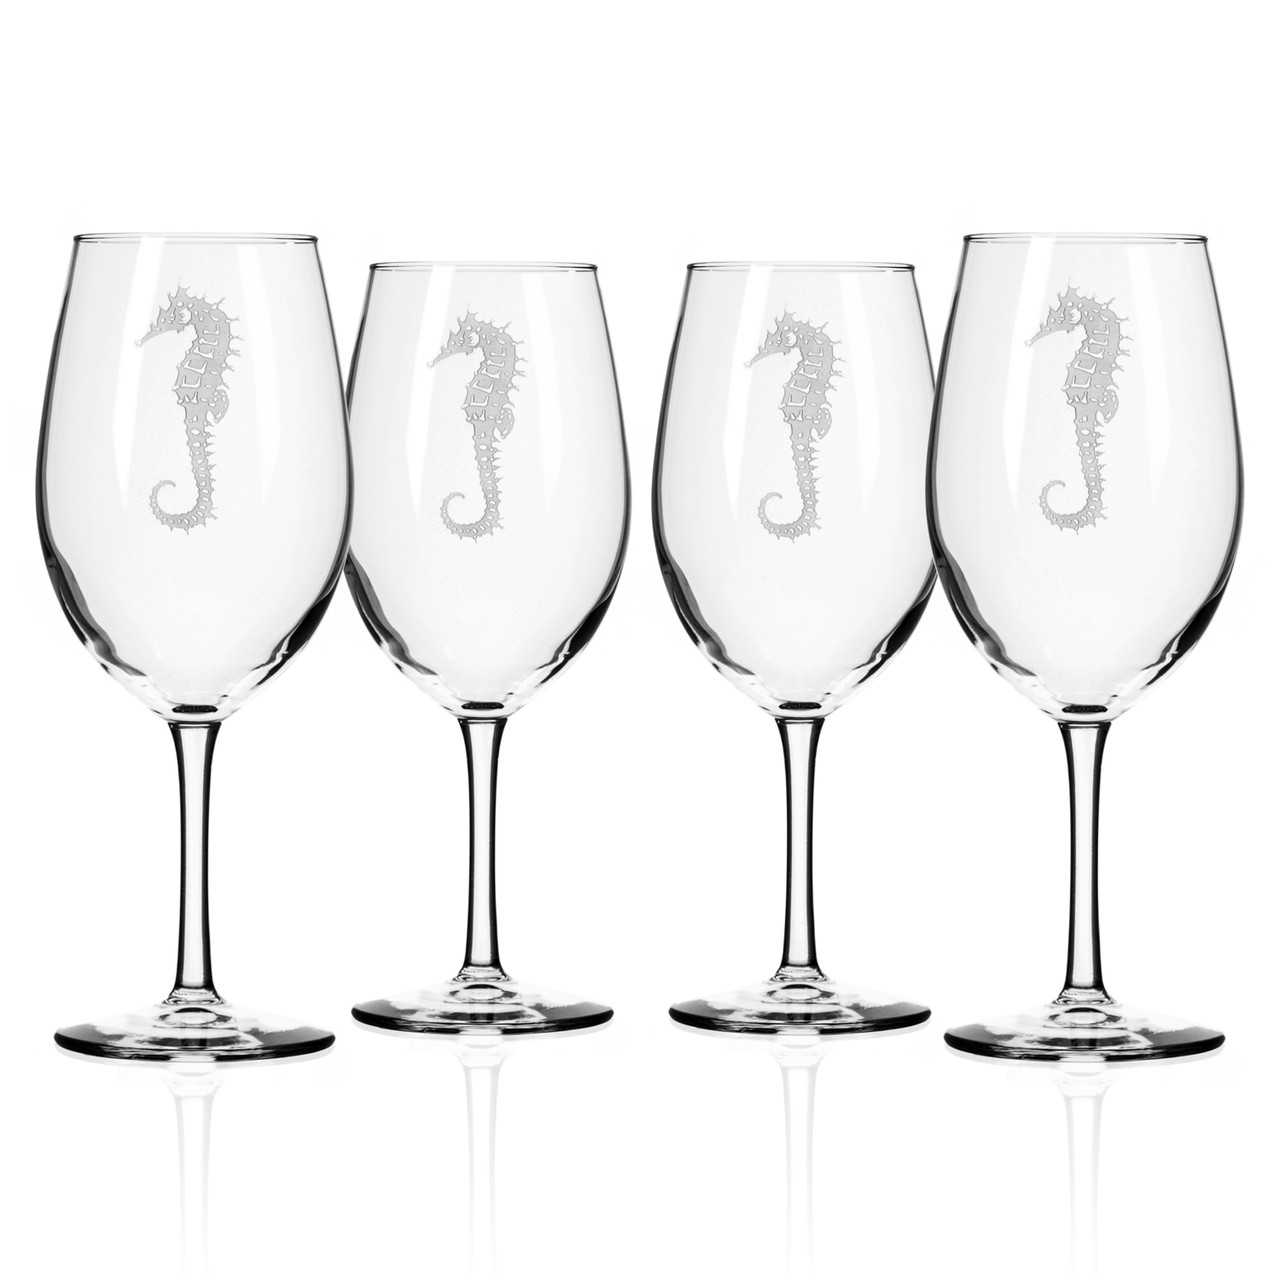 School of Fish Etched Large Wine Goblets - Set of 4